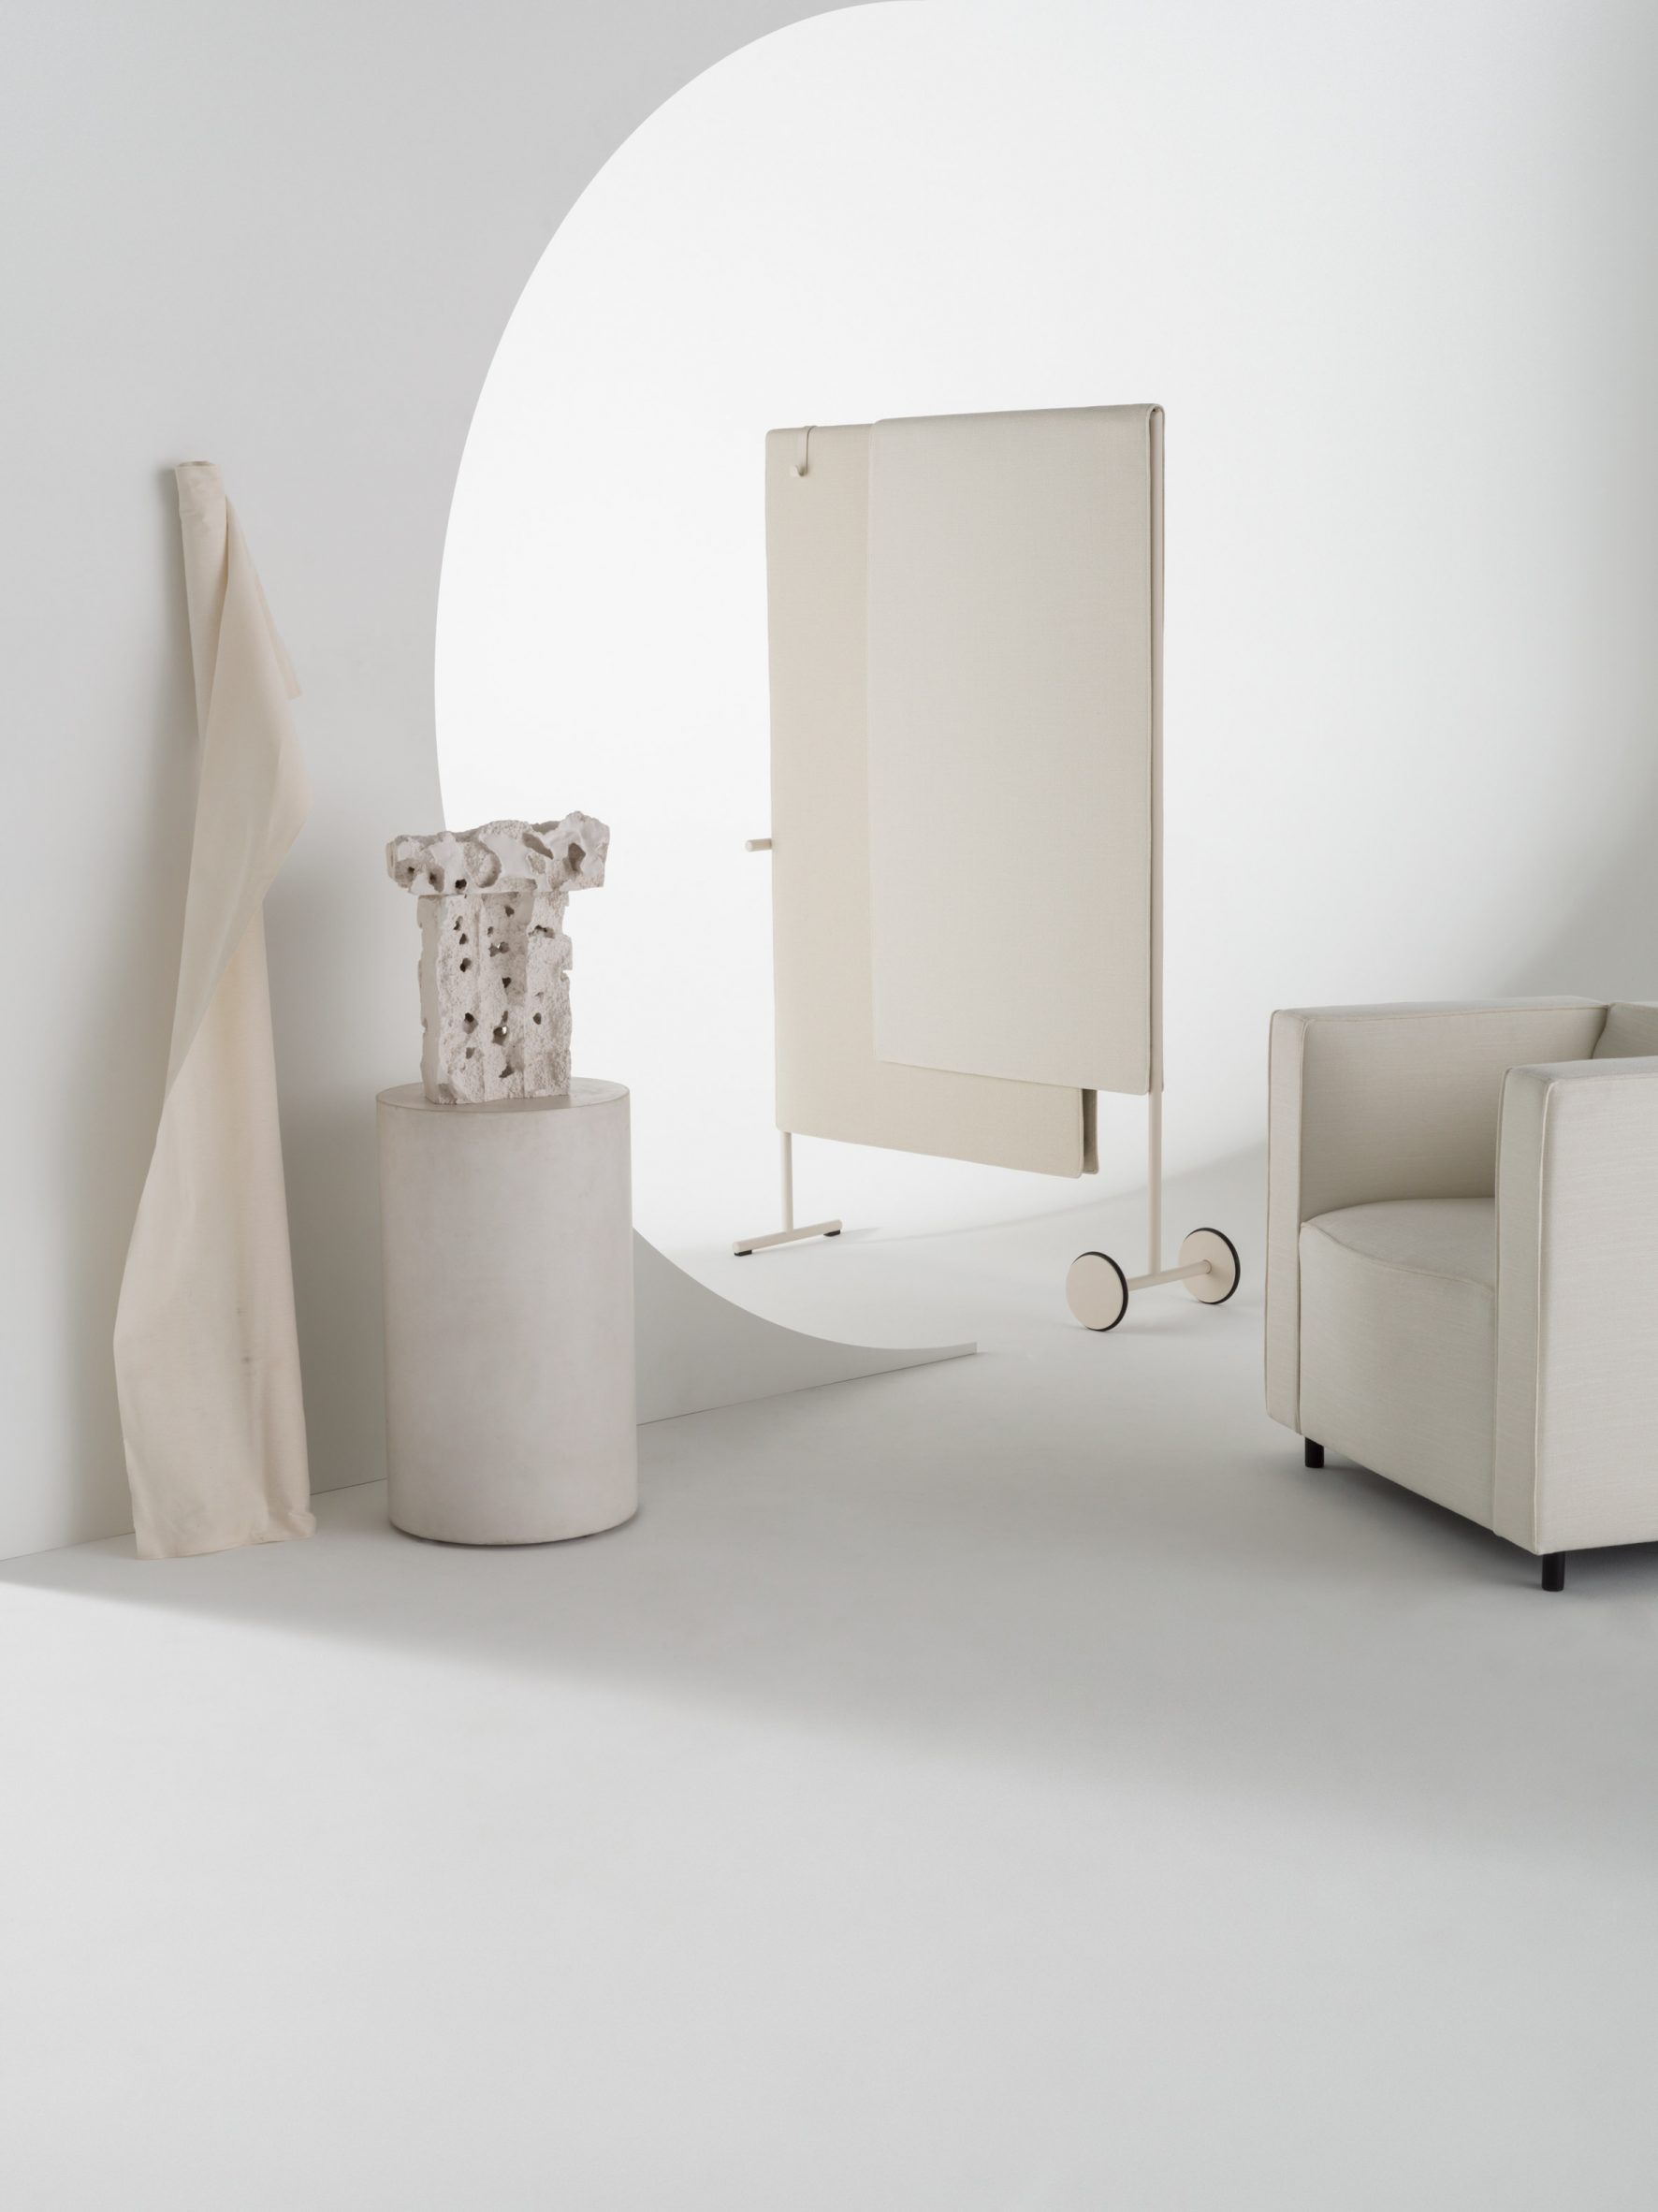 Offecct launches Pauline Deltour furniture as first post posthumous designs